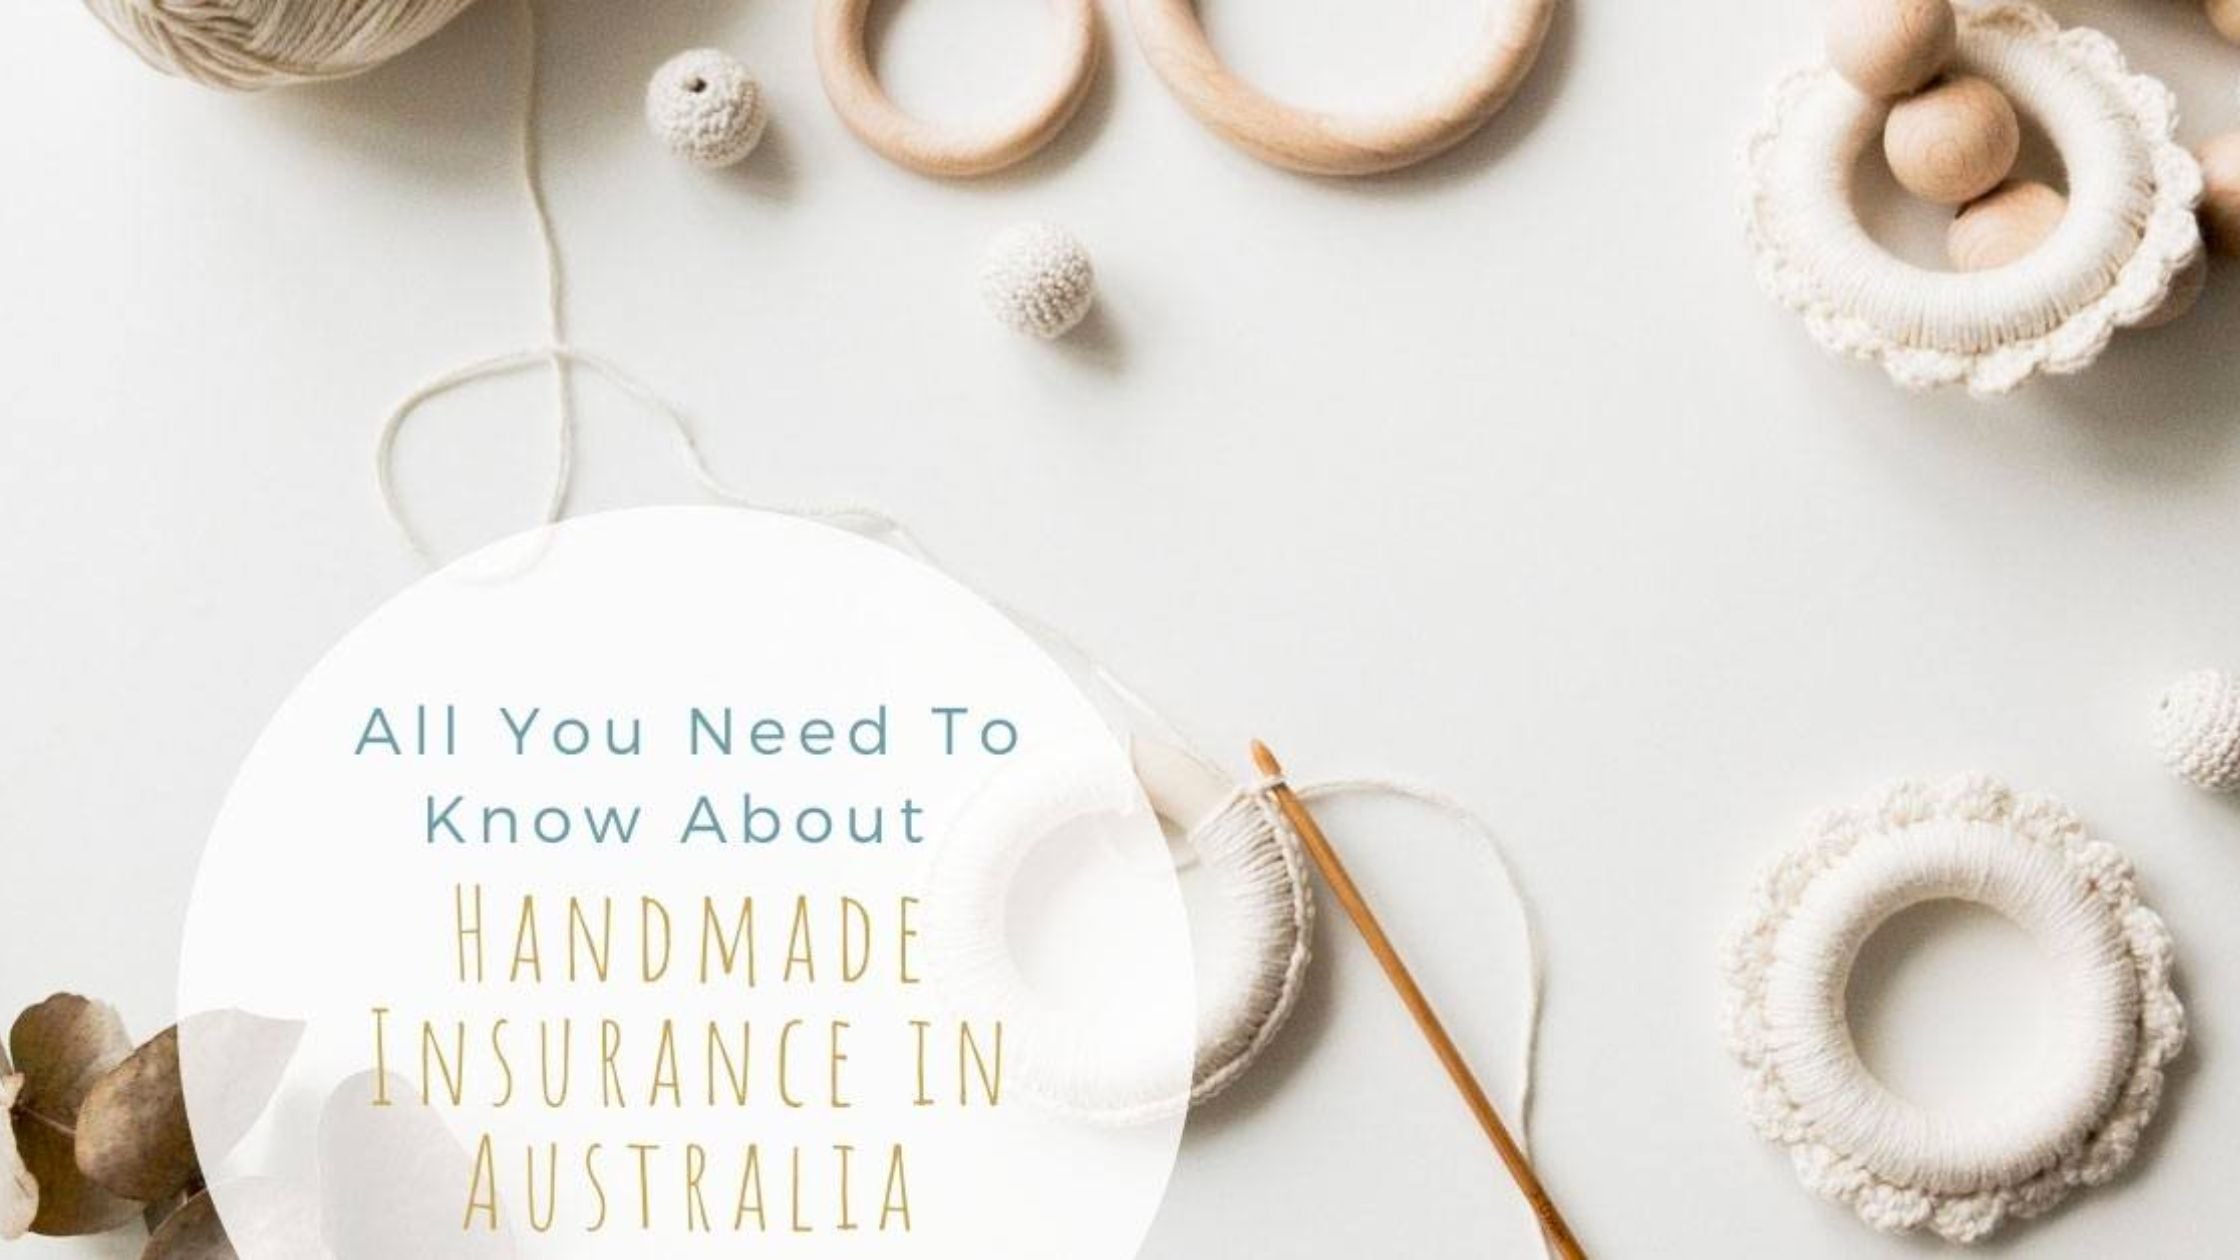 All you need to know about handmade insurance in Australia